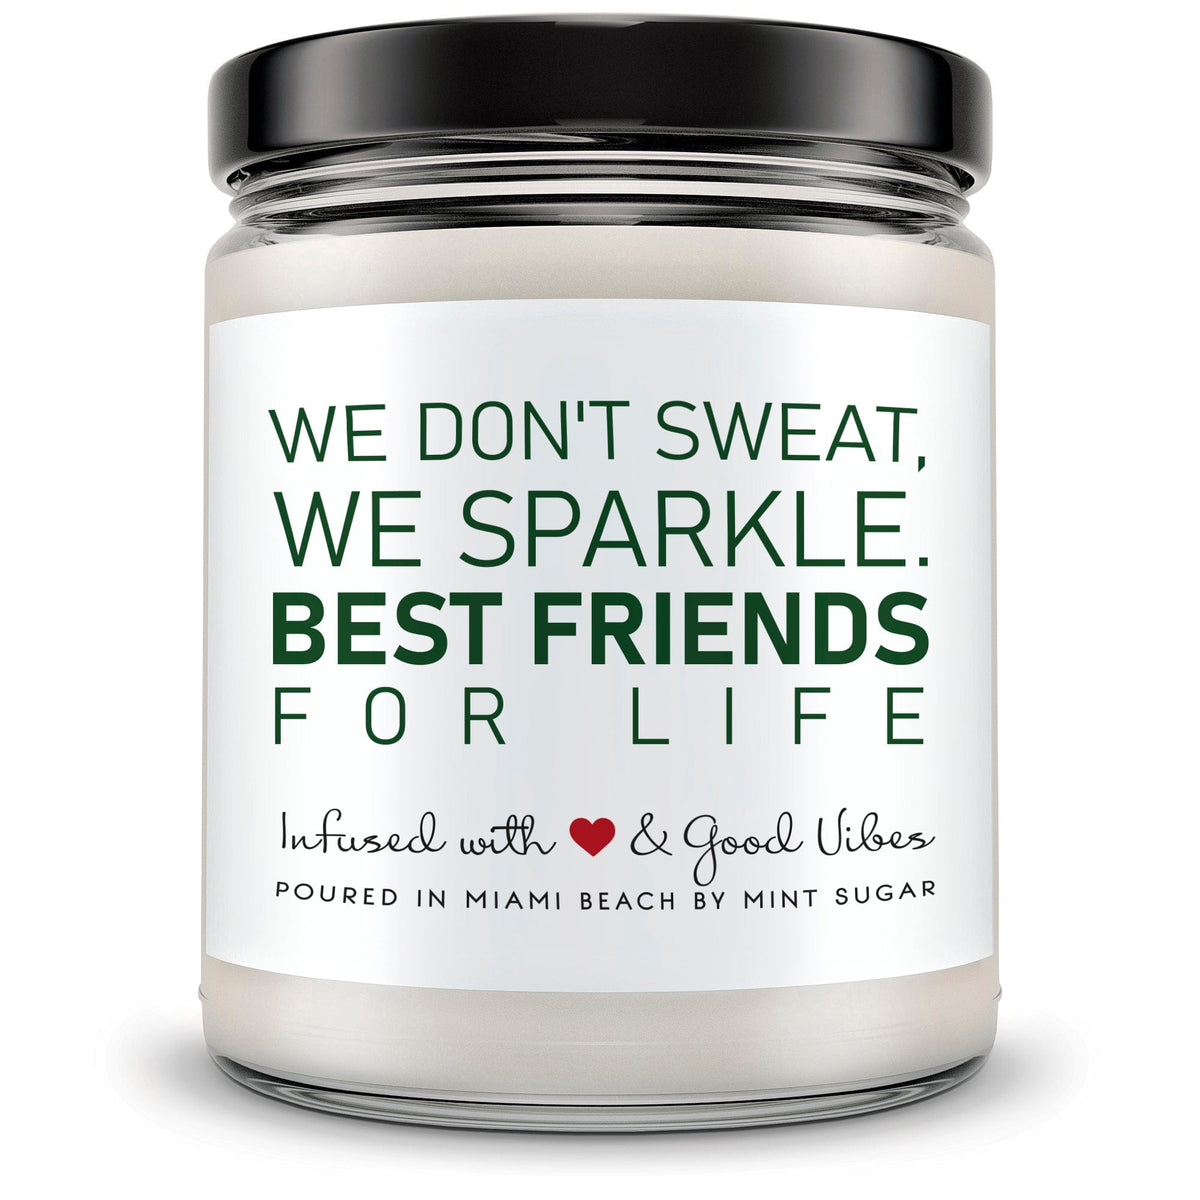 We Don't Sweat, We Sparkle. Best Friends for Life. - Mint Sugar Candle